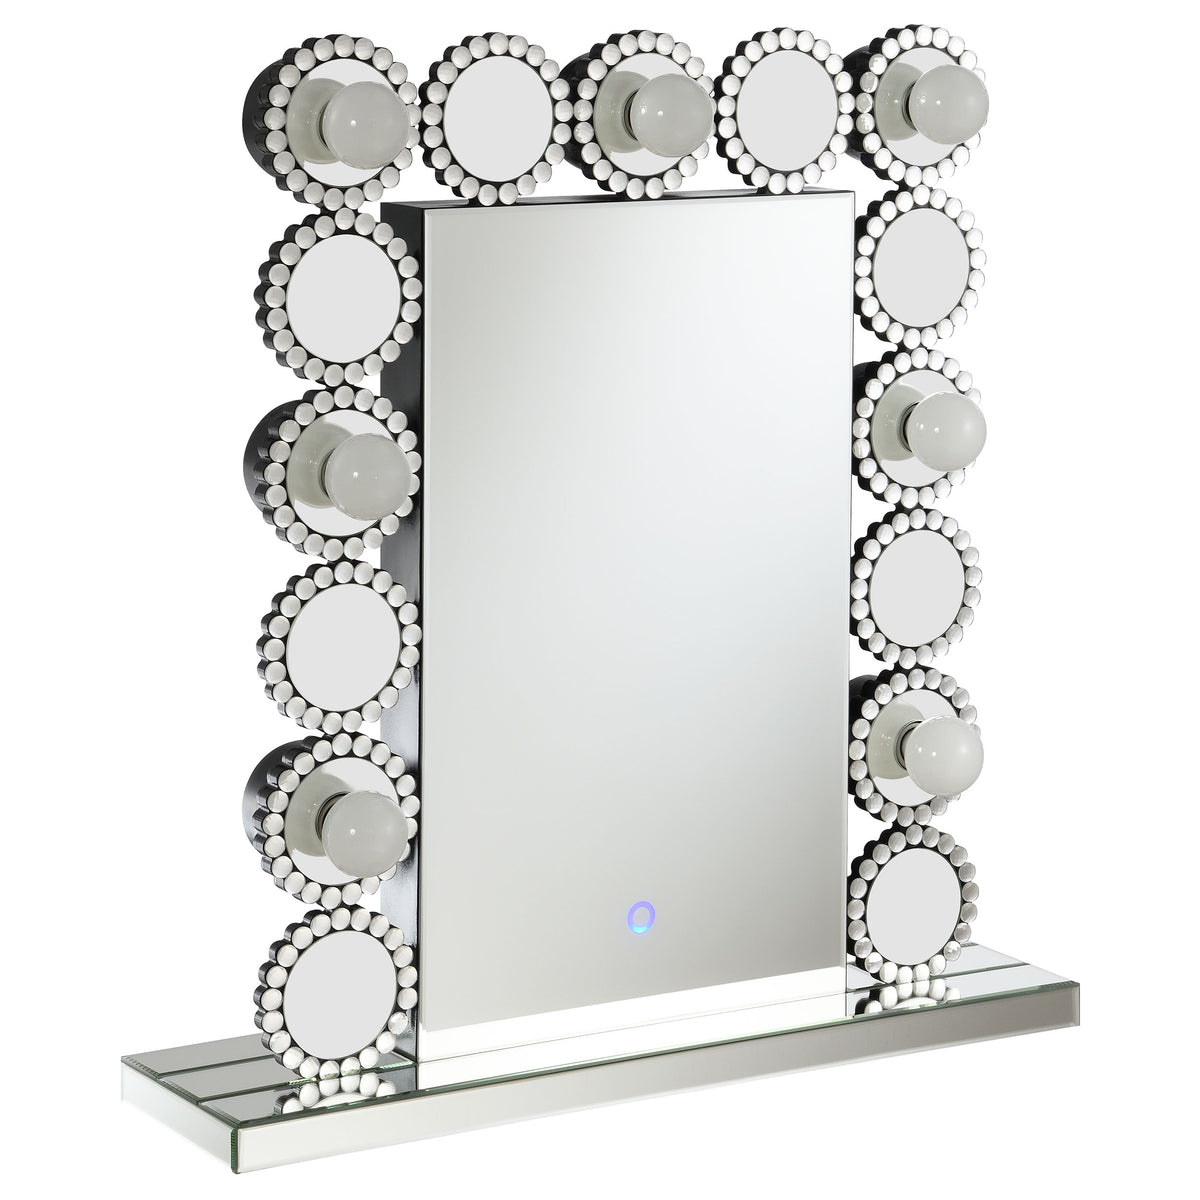 Aghes Rectangular Table Mirror with LED Lighting Mirror Aghes Rectangular Table Mirror with LED Lighting Mirror Half Price Furniture